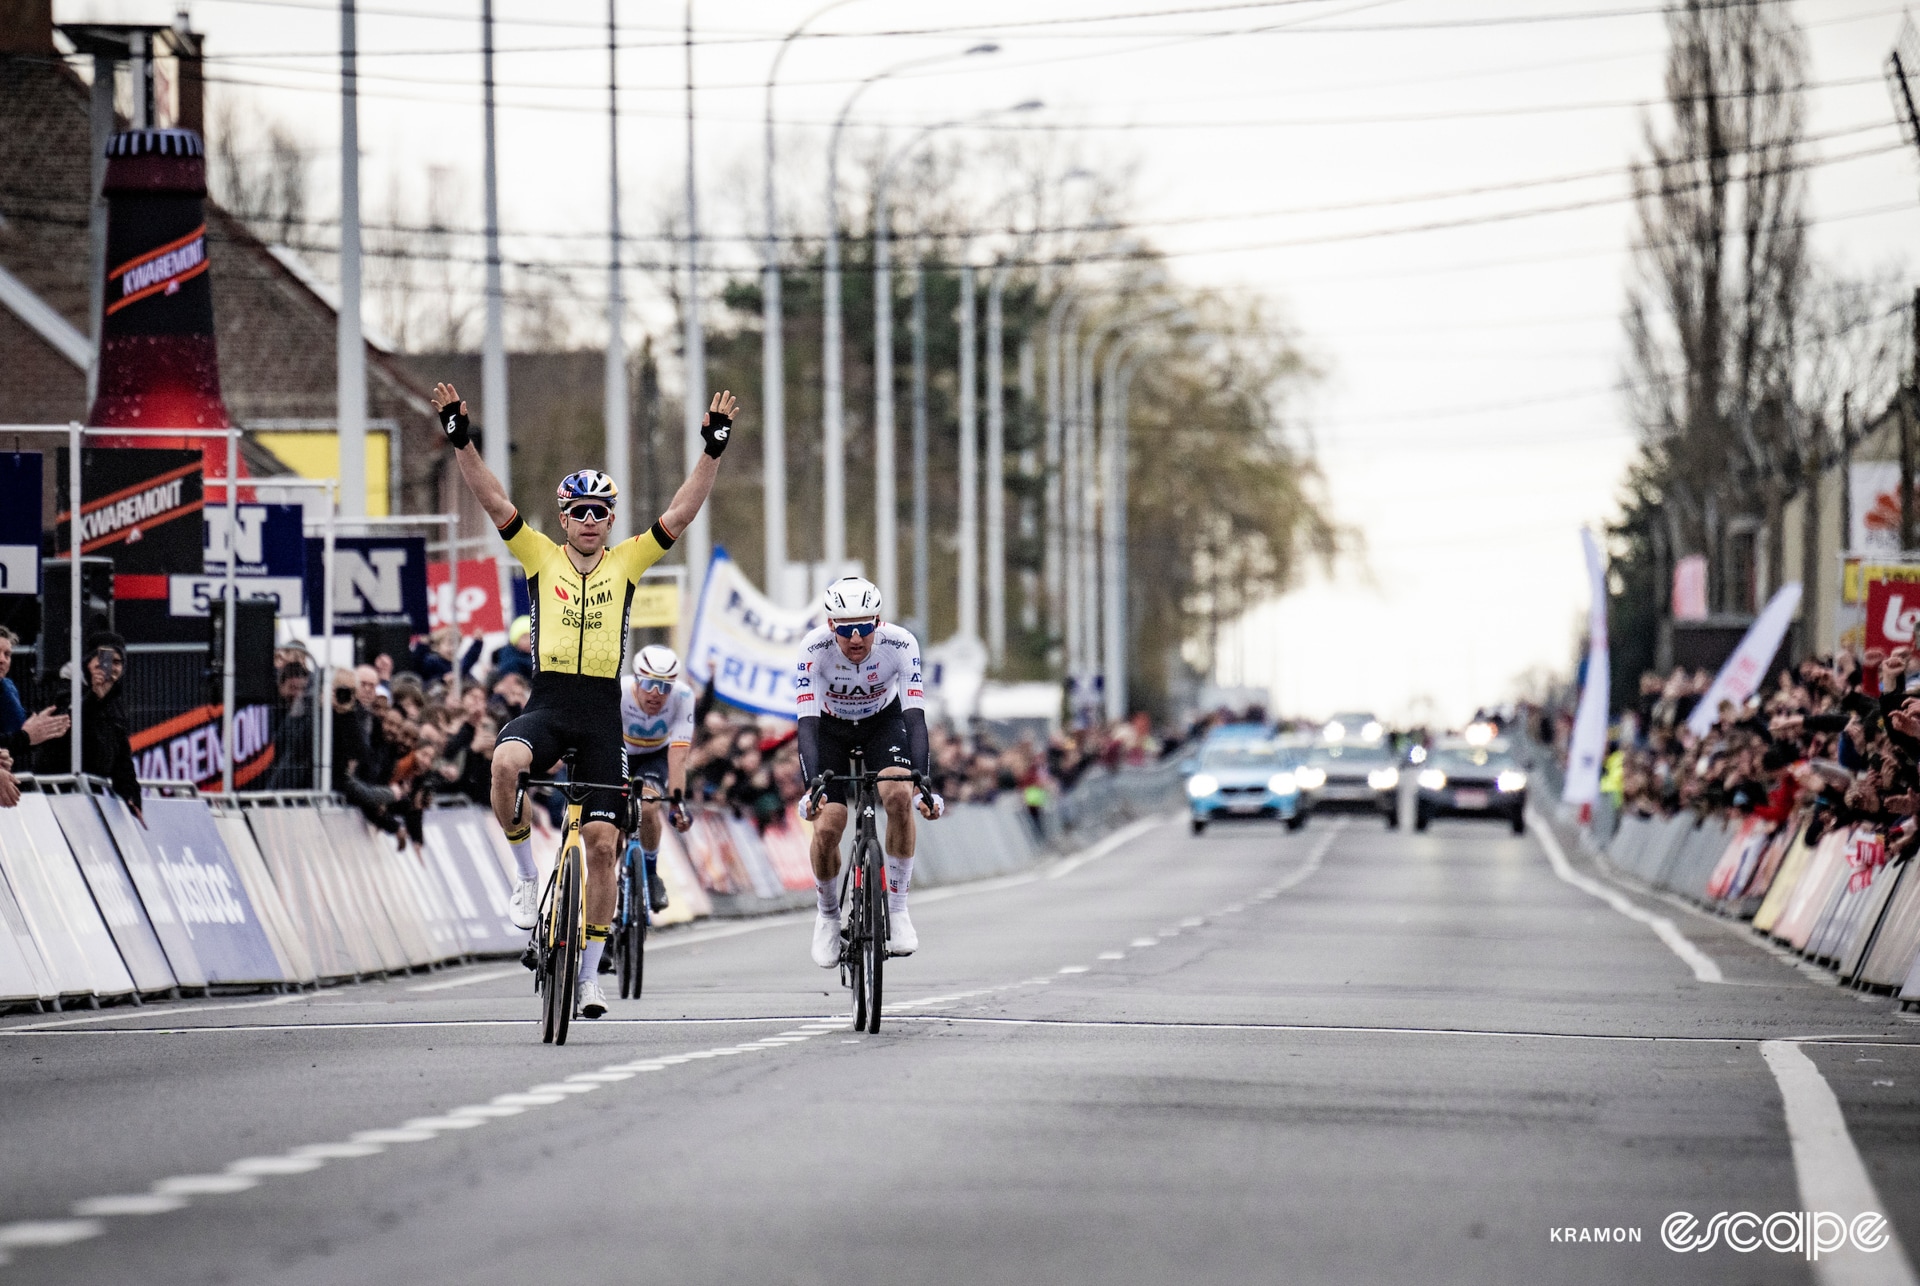 Van Aert celebrates winning with two hands in the air.